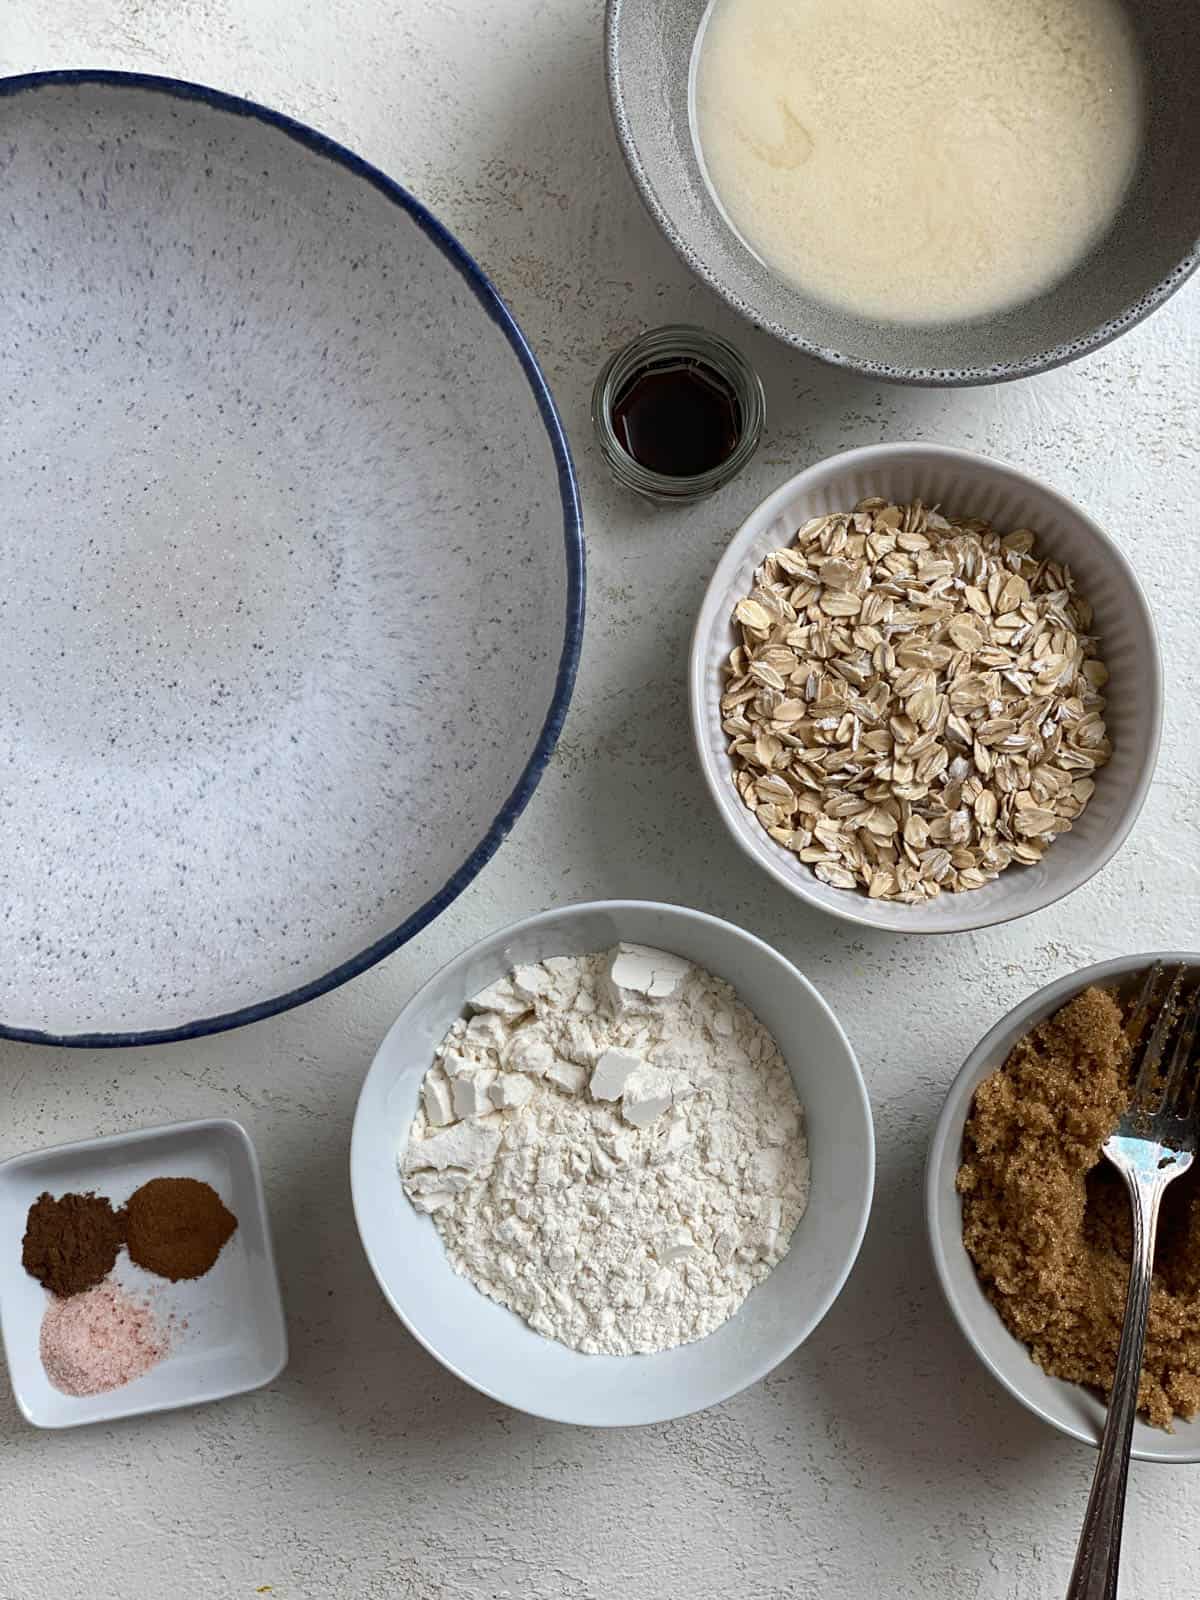 ingredients for Easy Pear Crisp [Vegan Pear Crumble] against a white surface